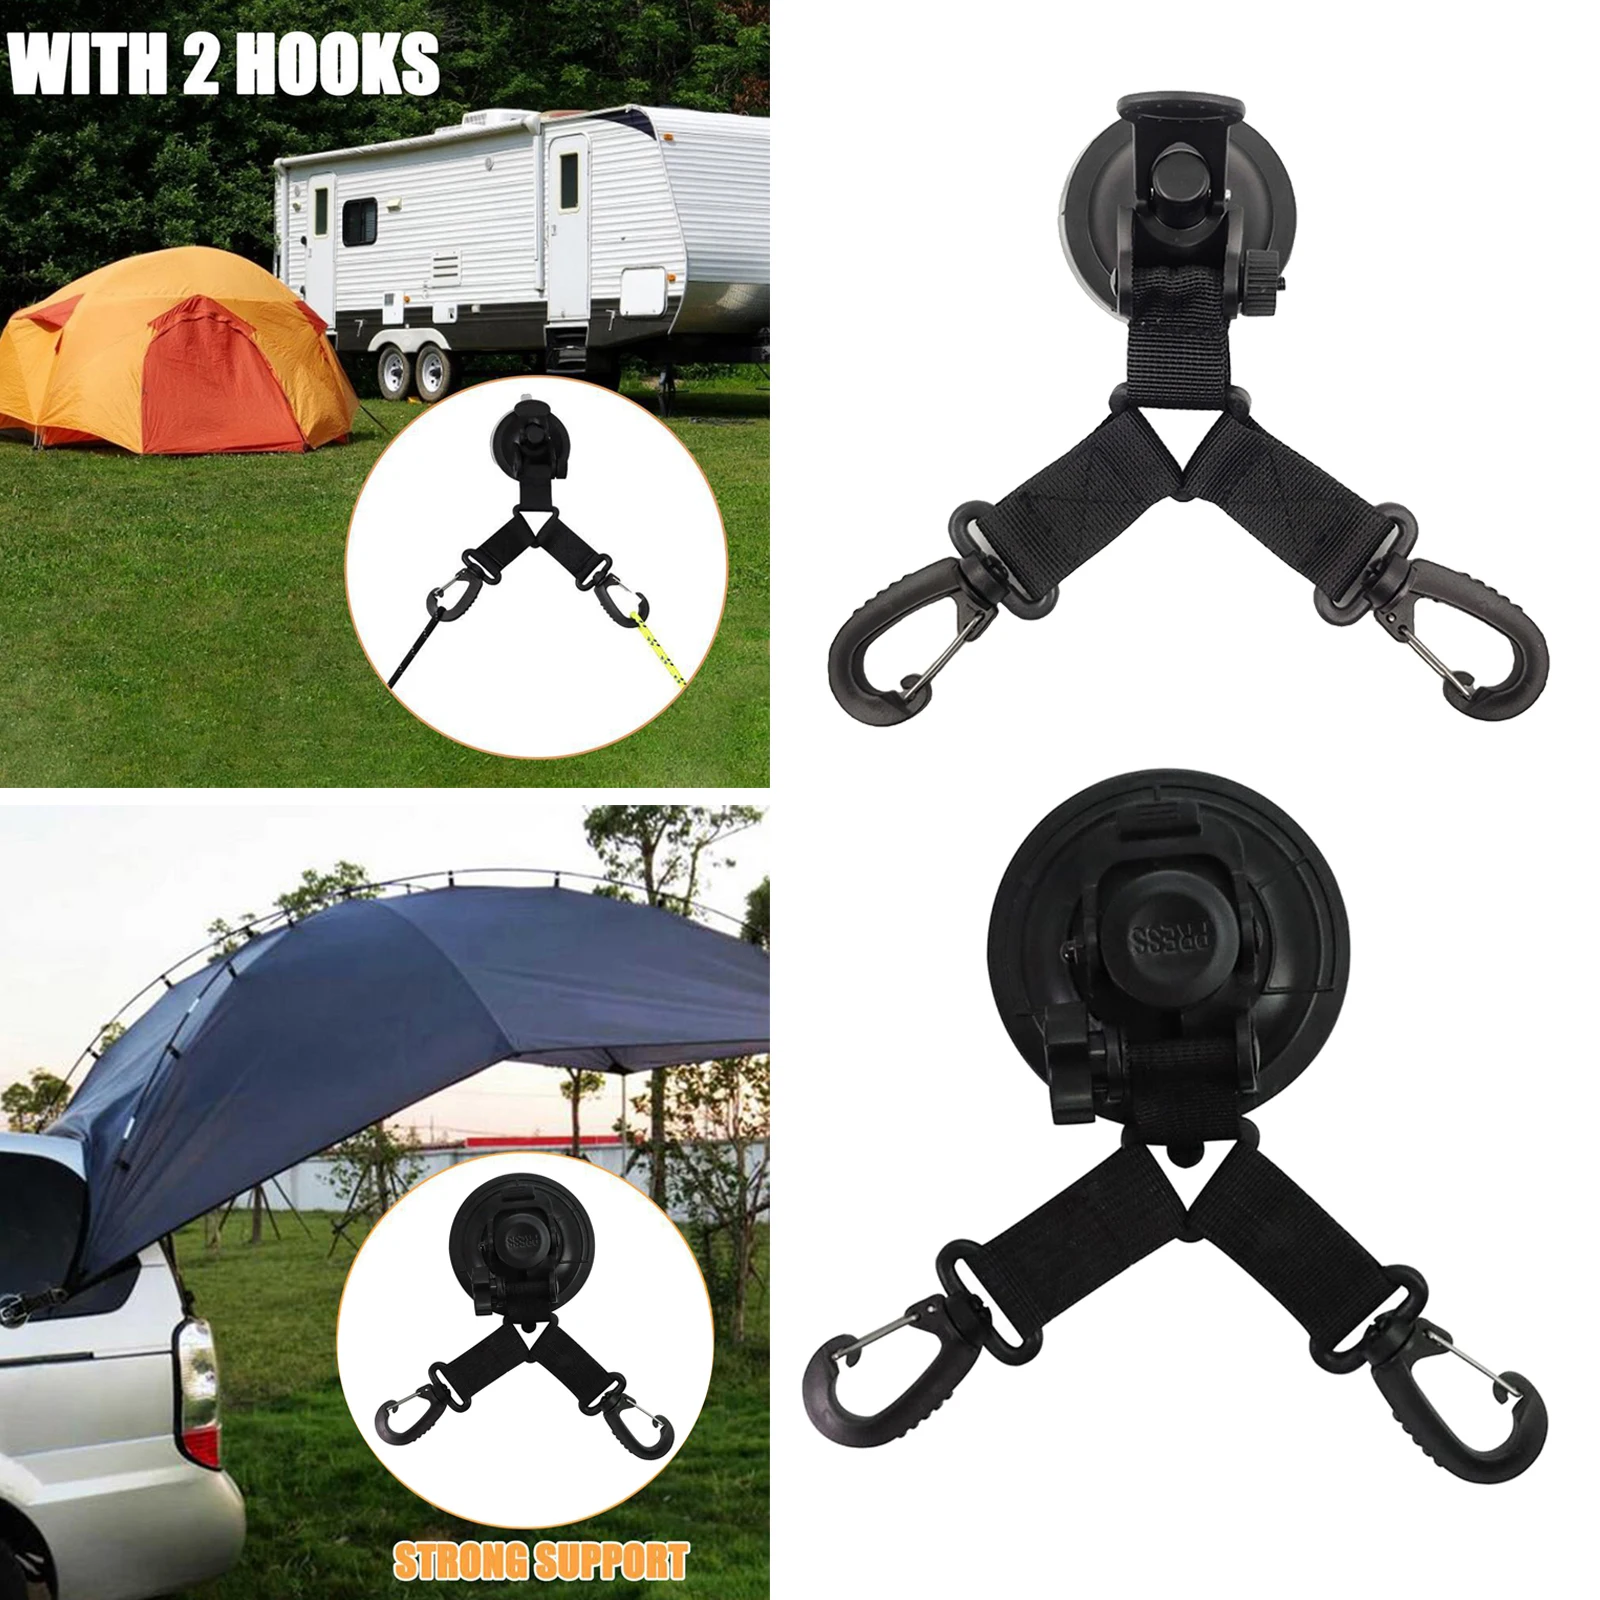 Suction Cup Anchor W/Securing Carabiner Hook Tents Camping Tarp Easy Install